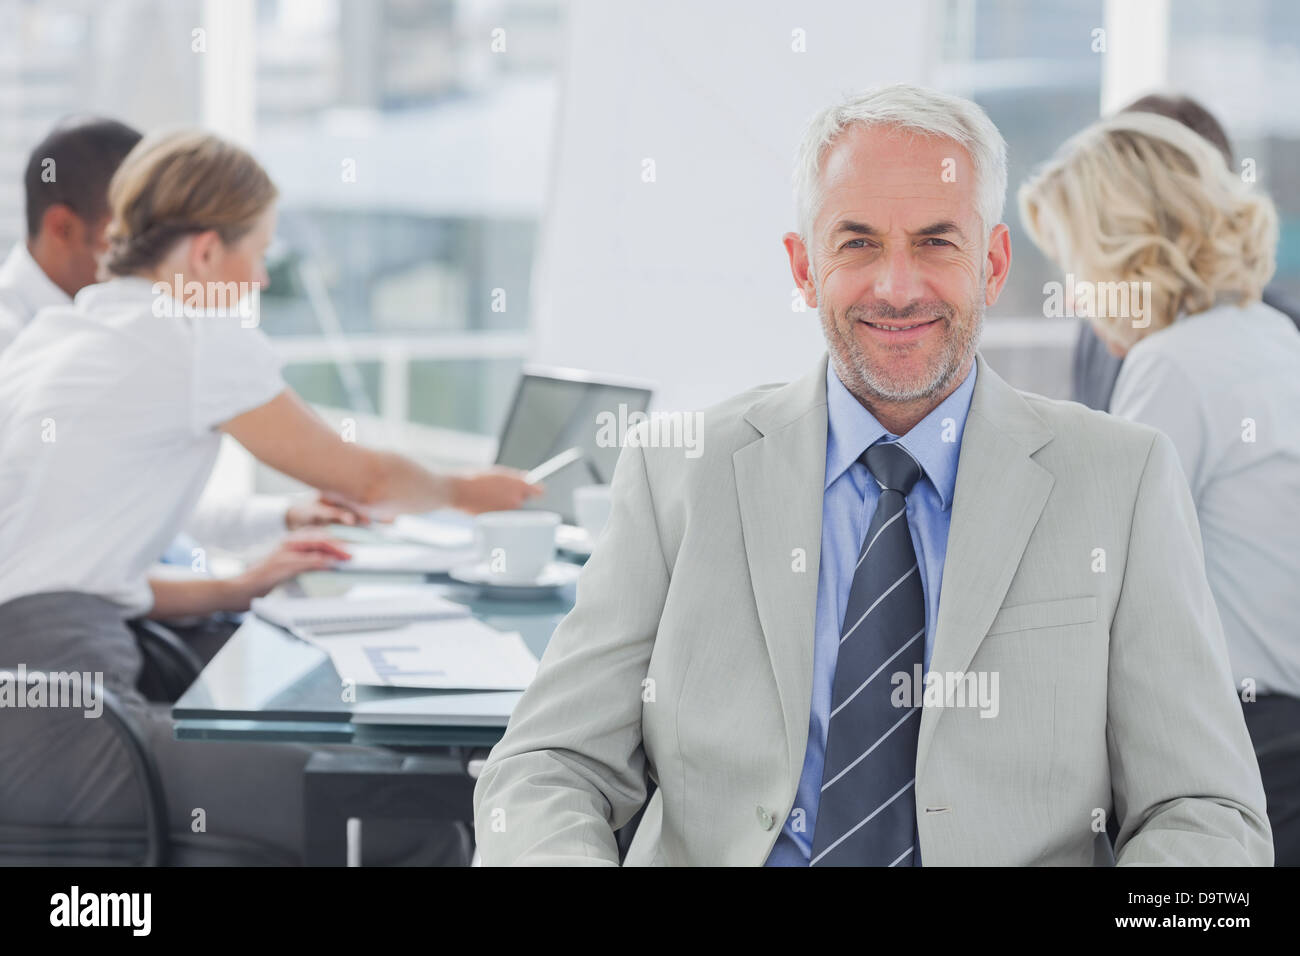 Charismatic businessman posing in the boardroom Stock Photo